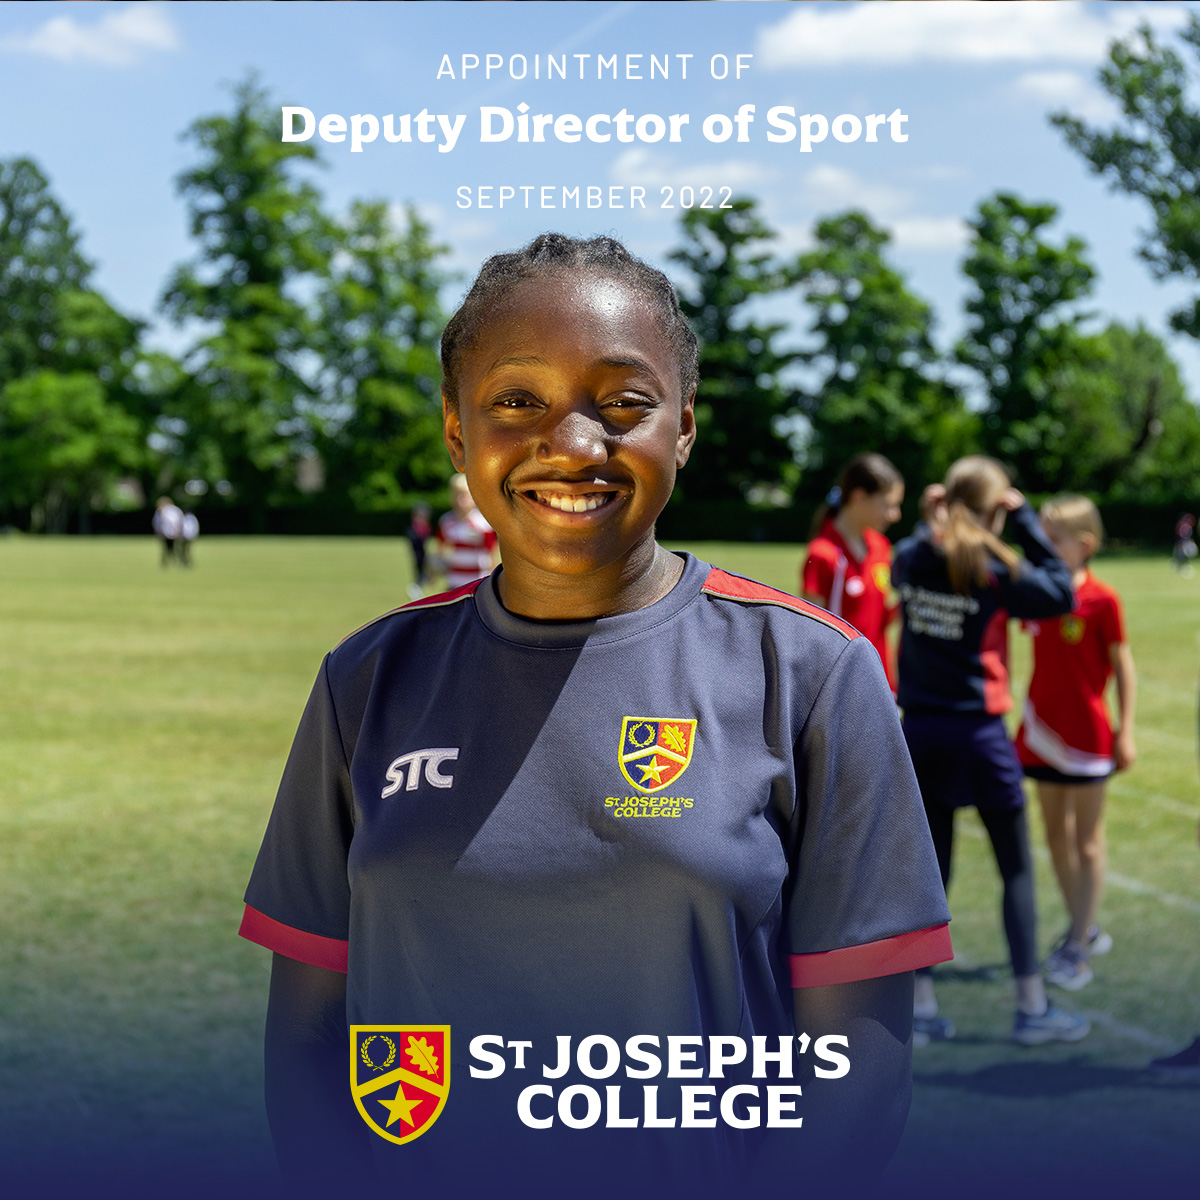 Delighted to be working with St Joseph's College, Ipswich on their appointment a Deputy Director of Sport. The DDoS will lead an extensive and ambitious programme, including a large department of dedicated professionals. jobsinsport.online/job/76/deputy-… #jobsinsport #jobs #schoolsport